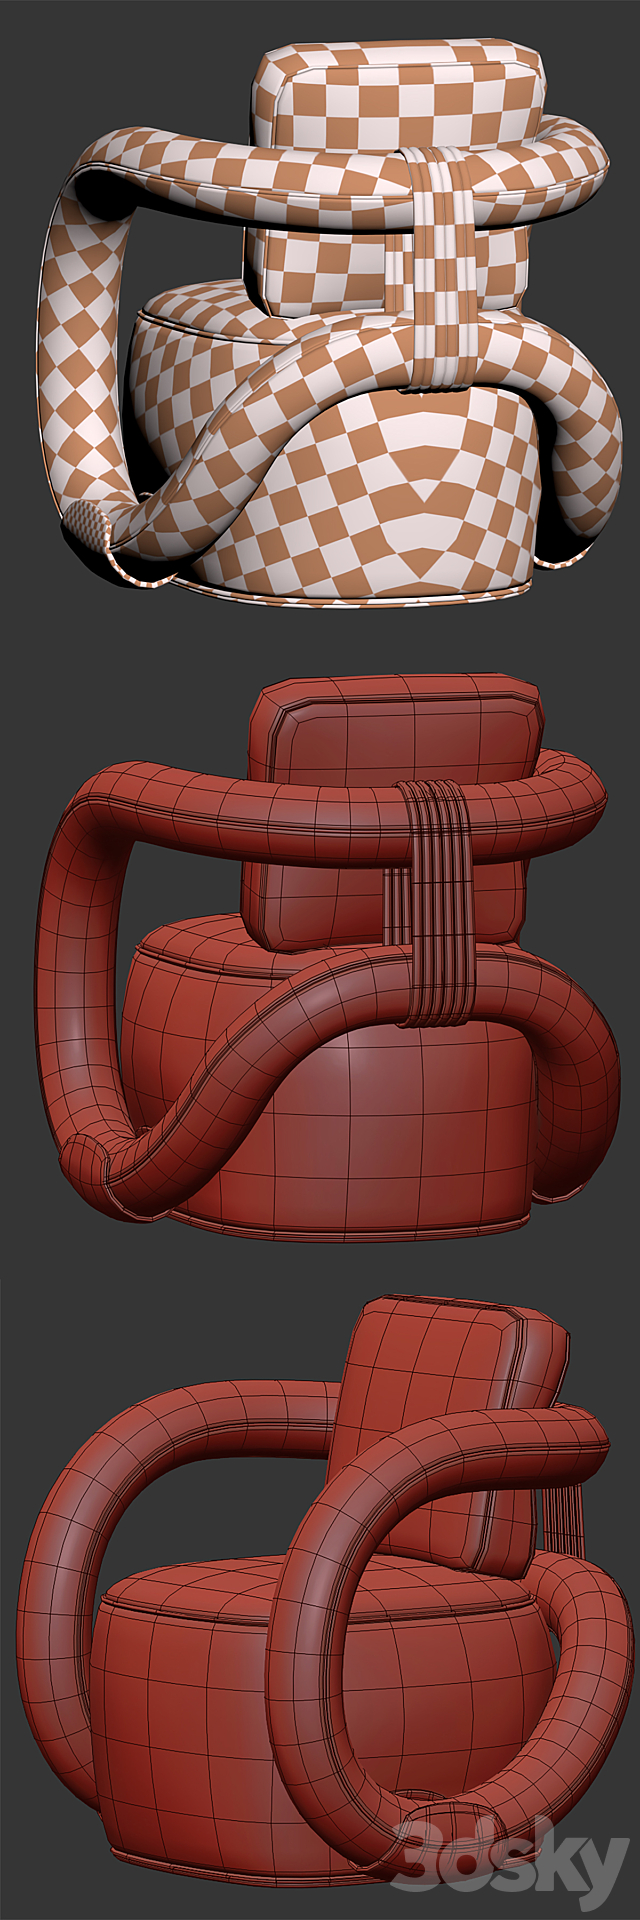 INFINITY CHAIR BY Alter Ego Studio 3DSMax File - thumbnail 7